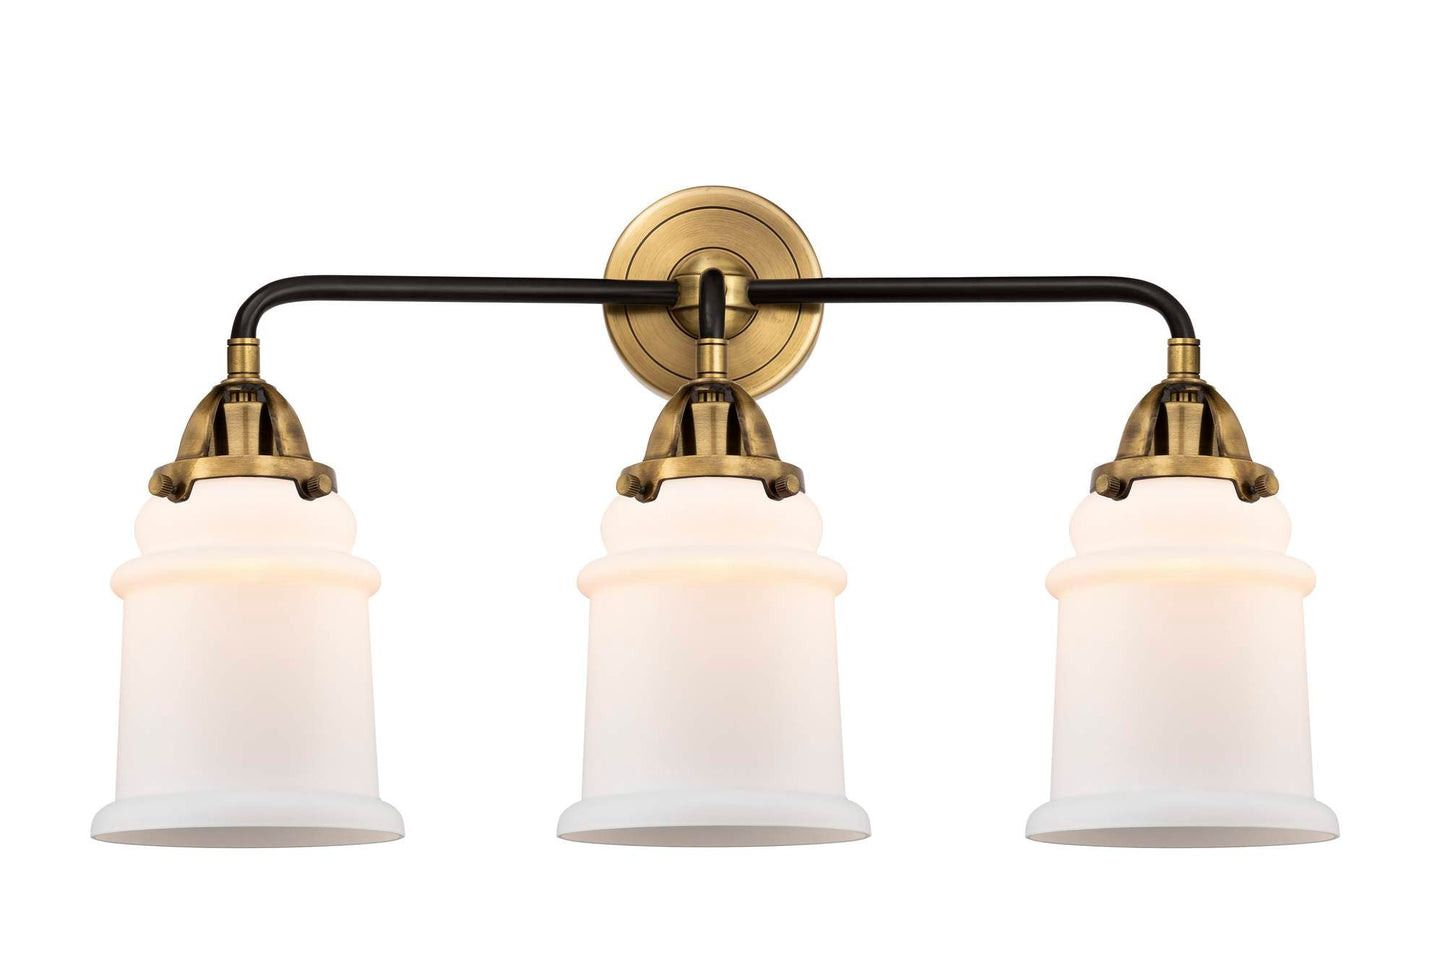 3-Light 24" Black Antique Brass Bath Vanity Light - Matte White Canton Glass Shades - Choice of Finish And Incandesent Or LED Bulbs